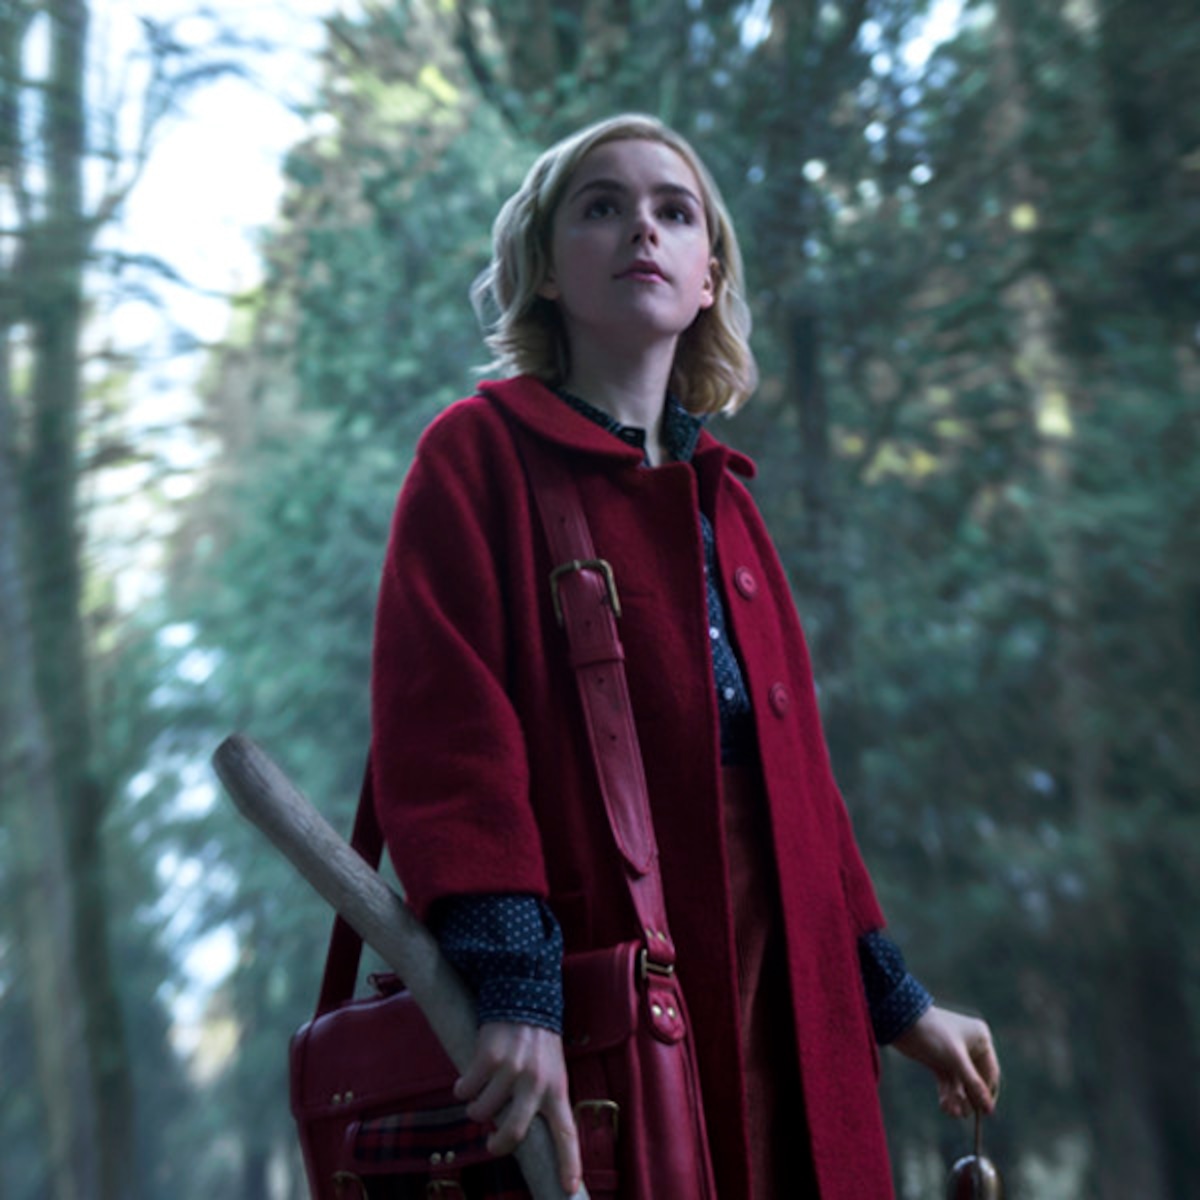 The Chilling Adventures Of Sabrina 2018 Wallpapers